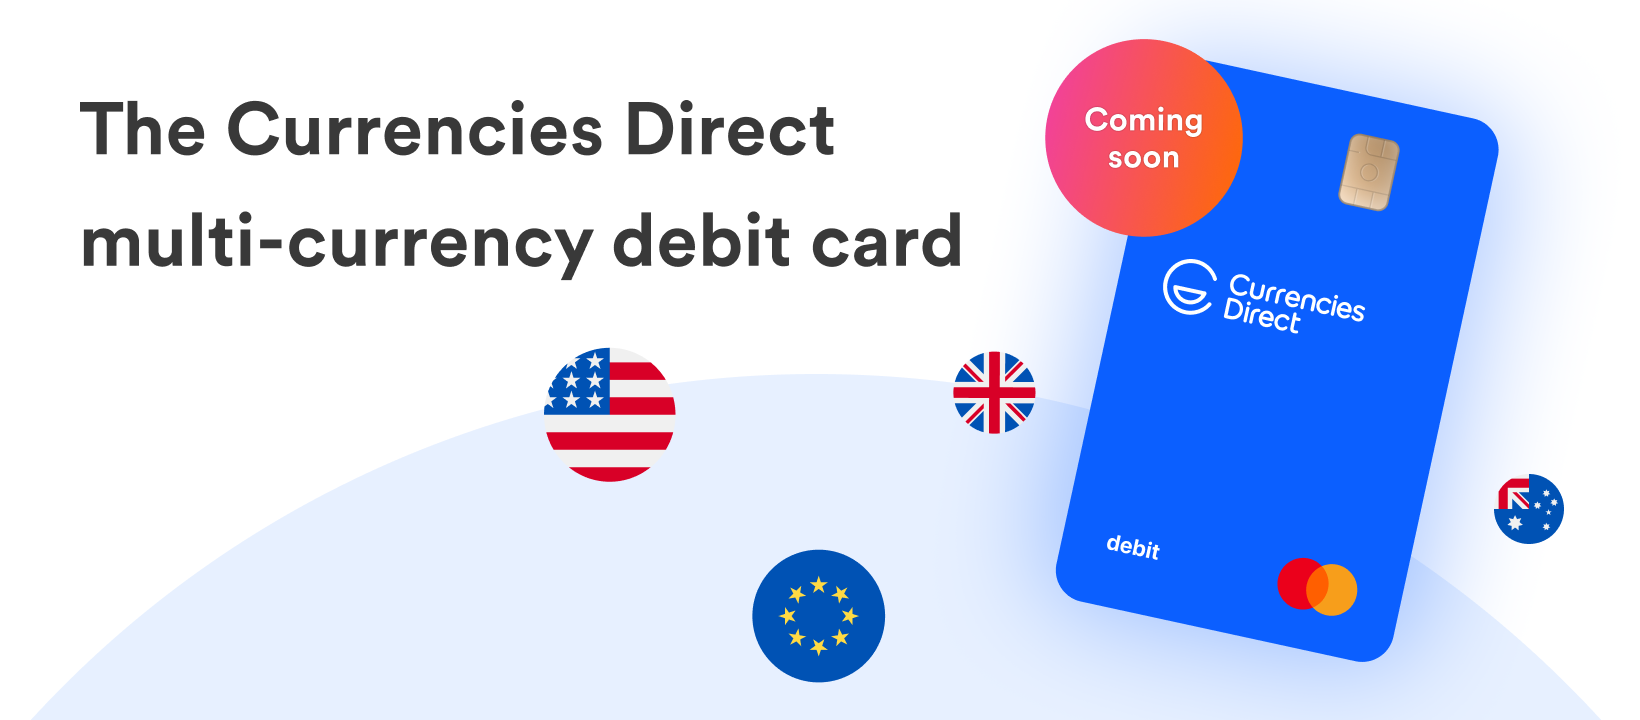 Discover a better way to pay – the Currencies Direct multi-currency debit card